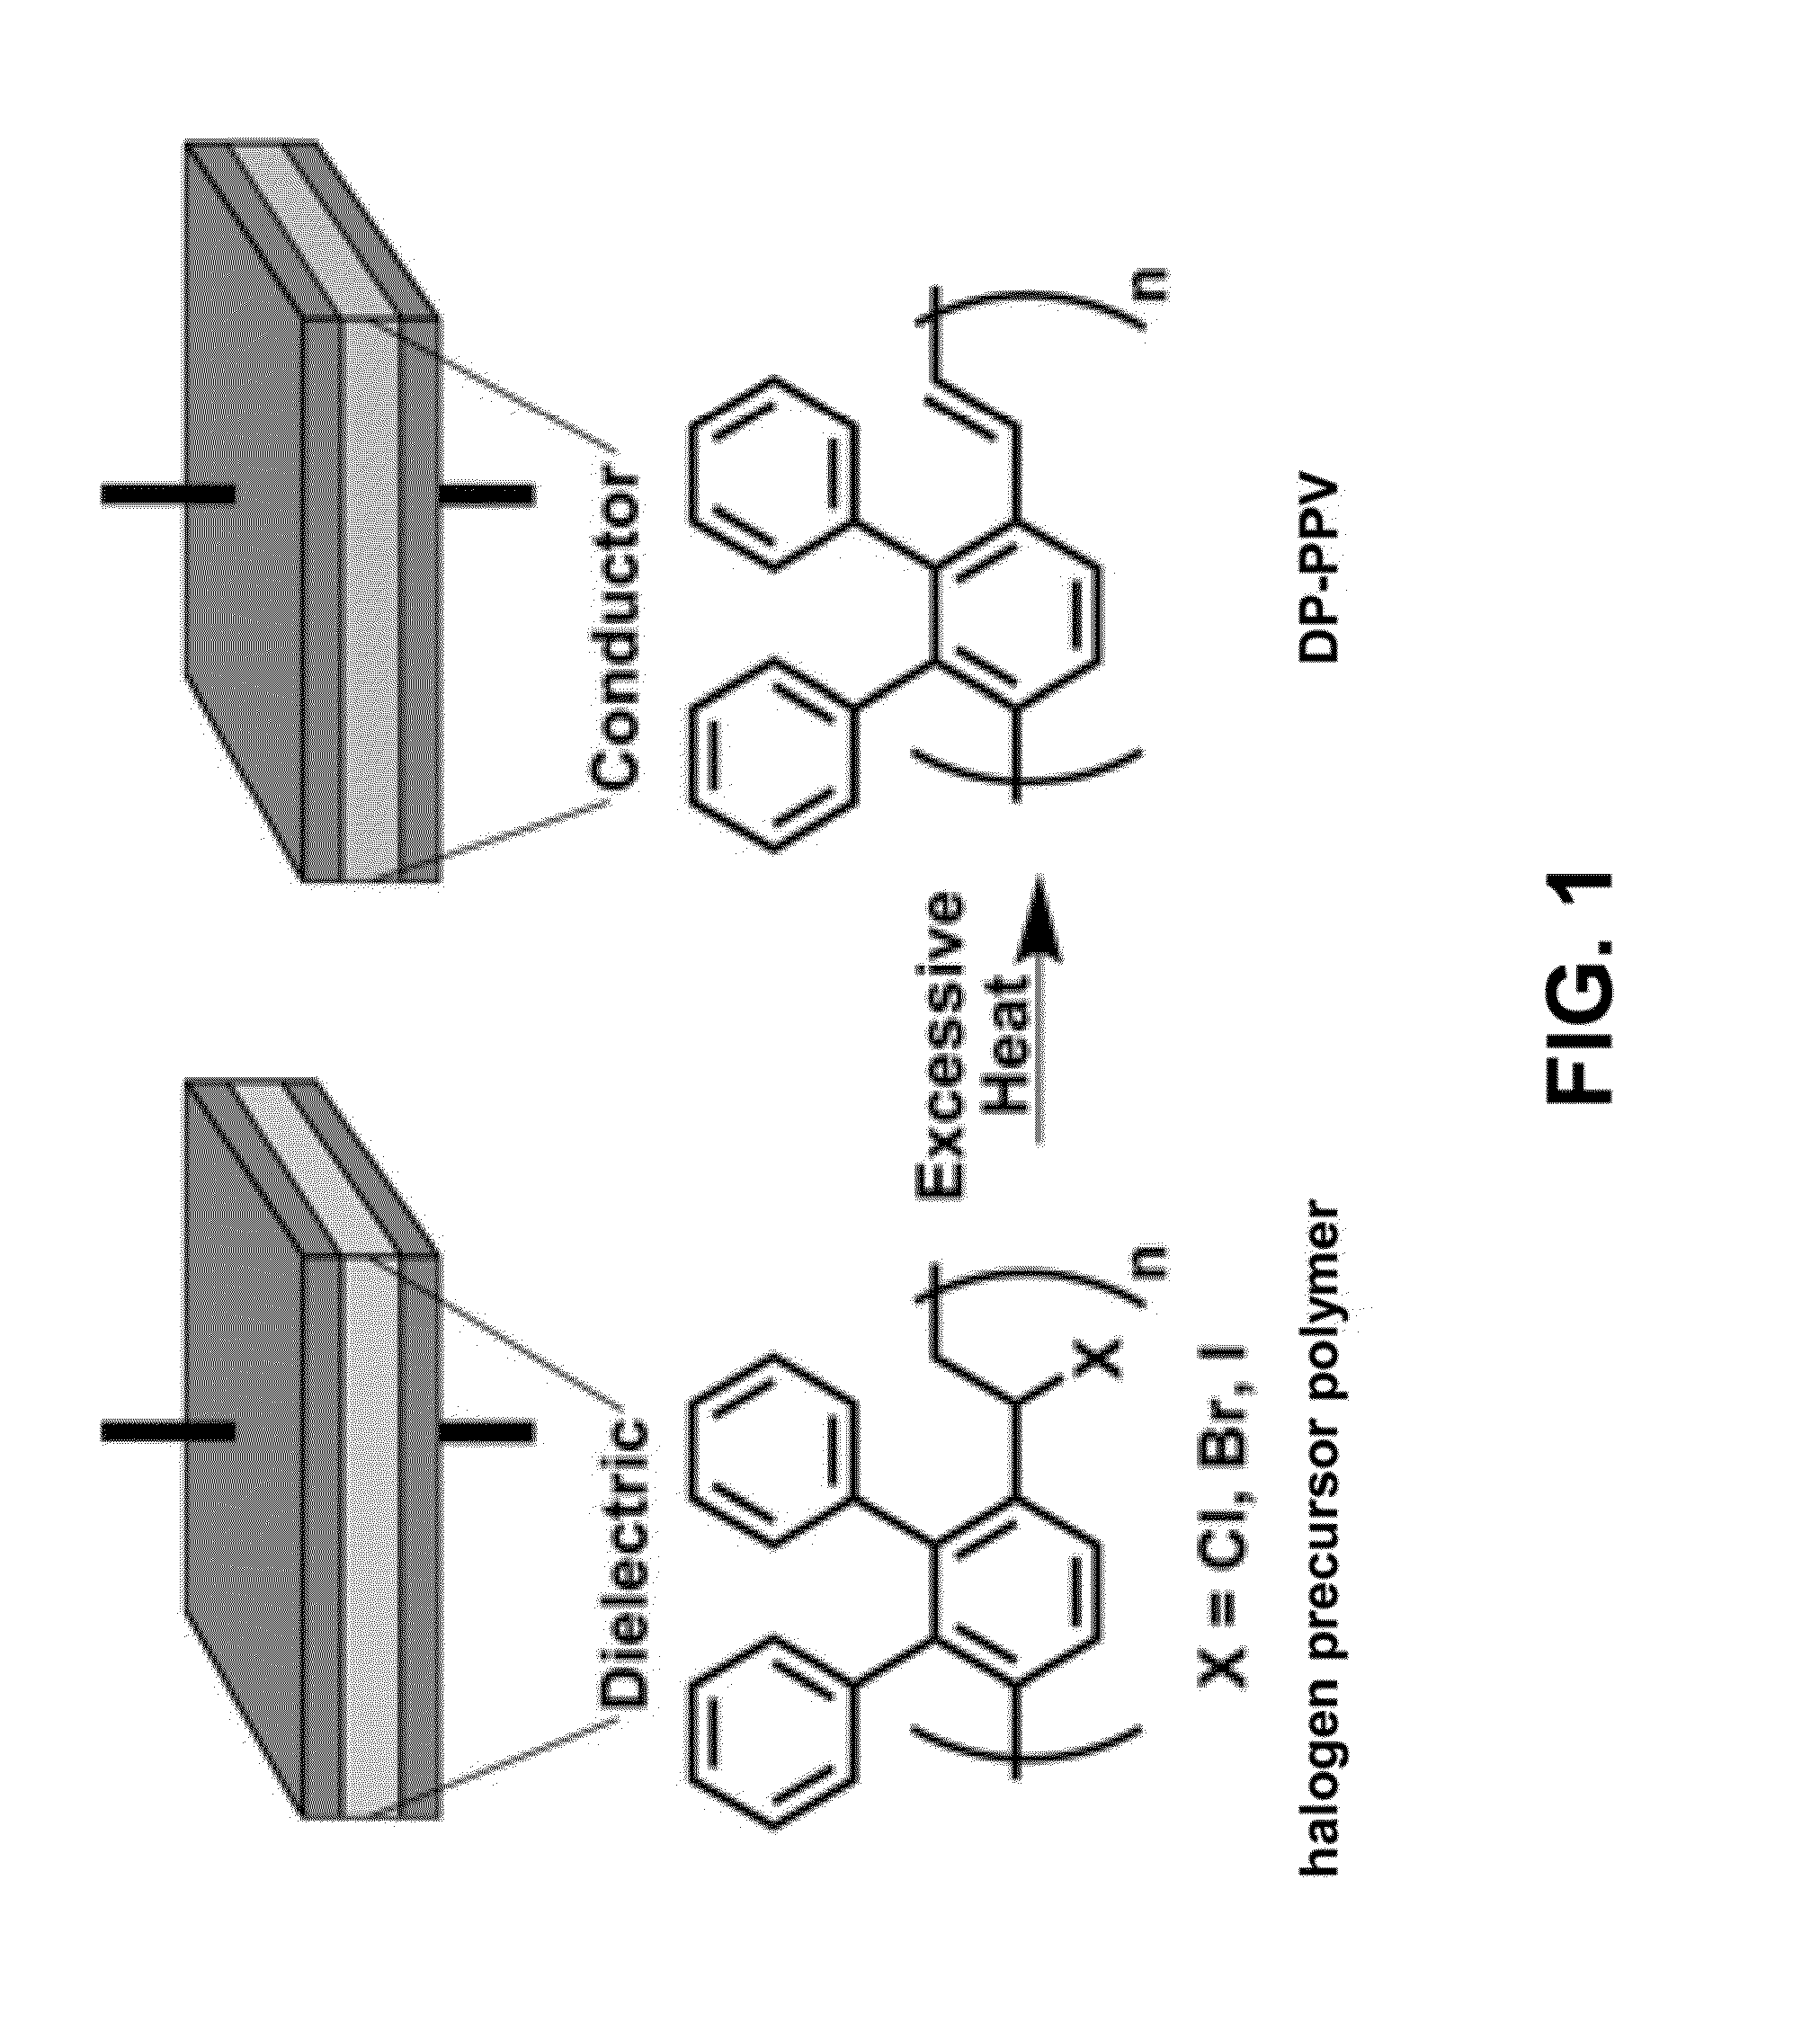 Thermally switchable dielectrics